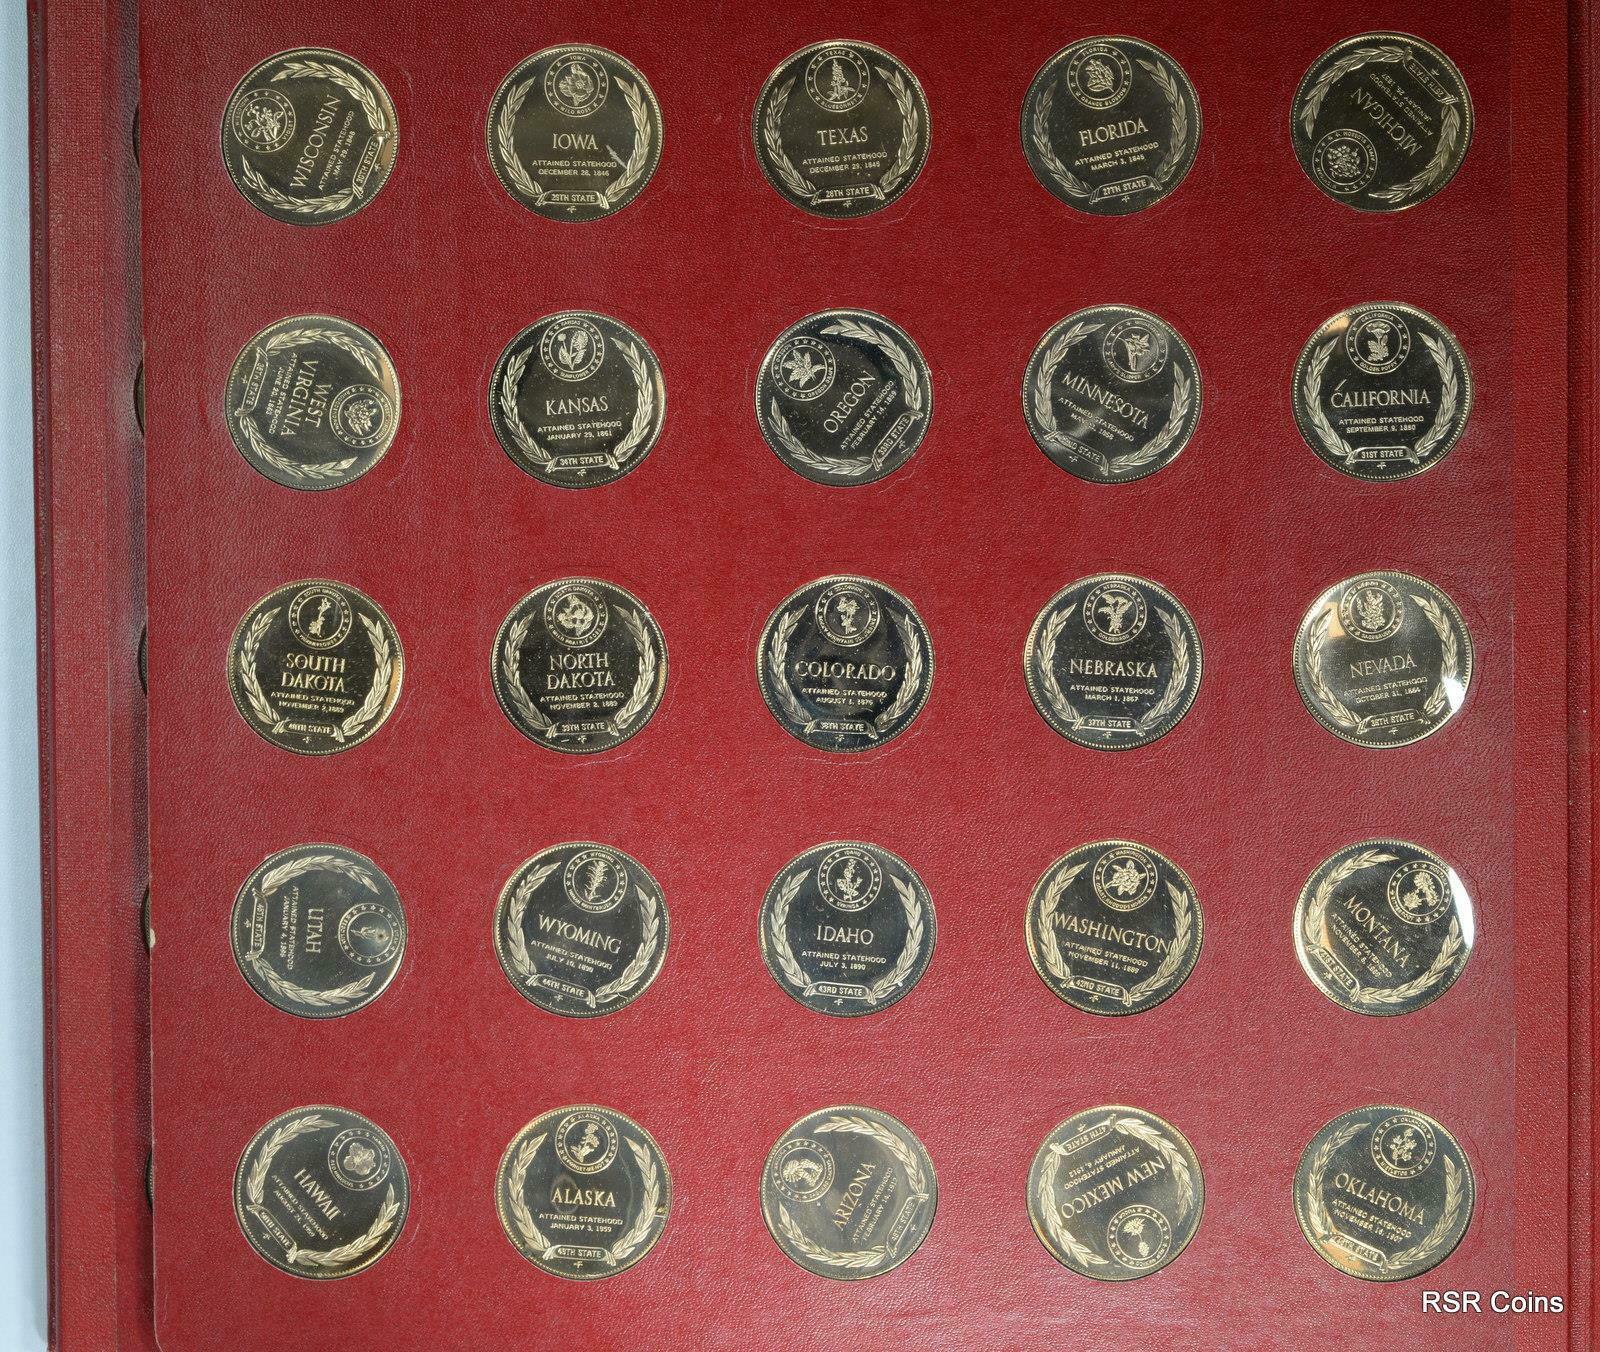 THE STATES OF THE UNION FRANKLIN MINT SOLID BRONZE PROOF SET WITH BOOK! #10641